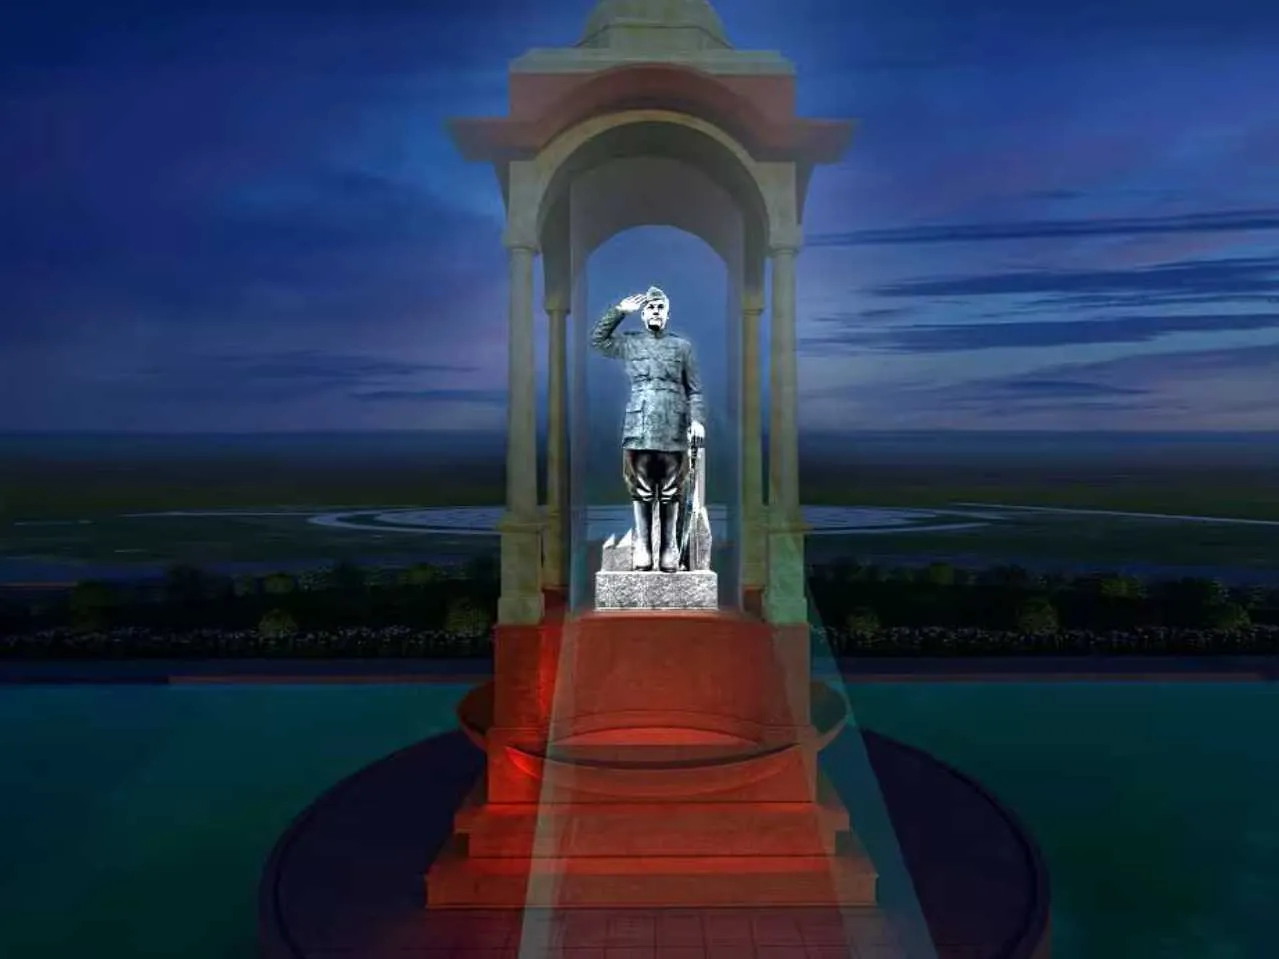 Holographic statue of Subhash chandra bose at India Gate 